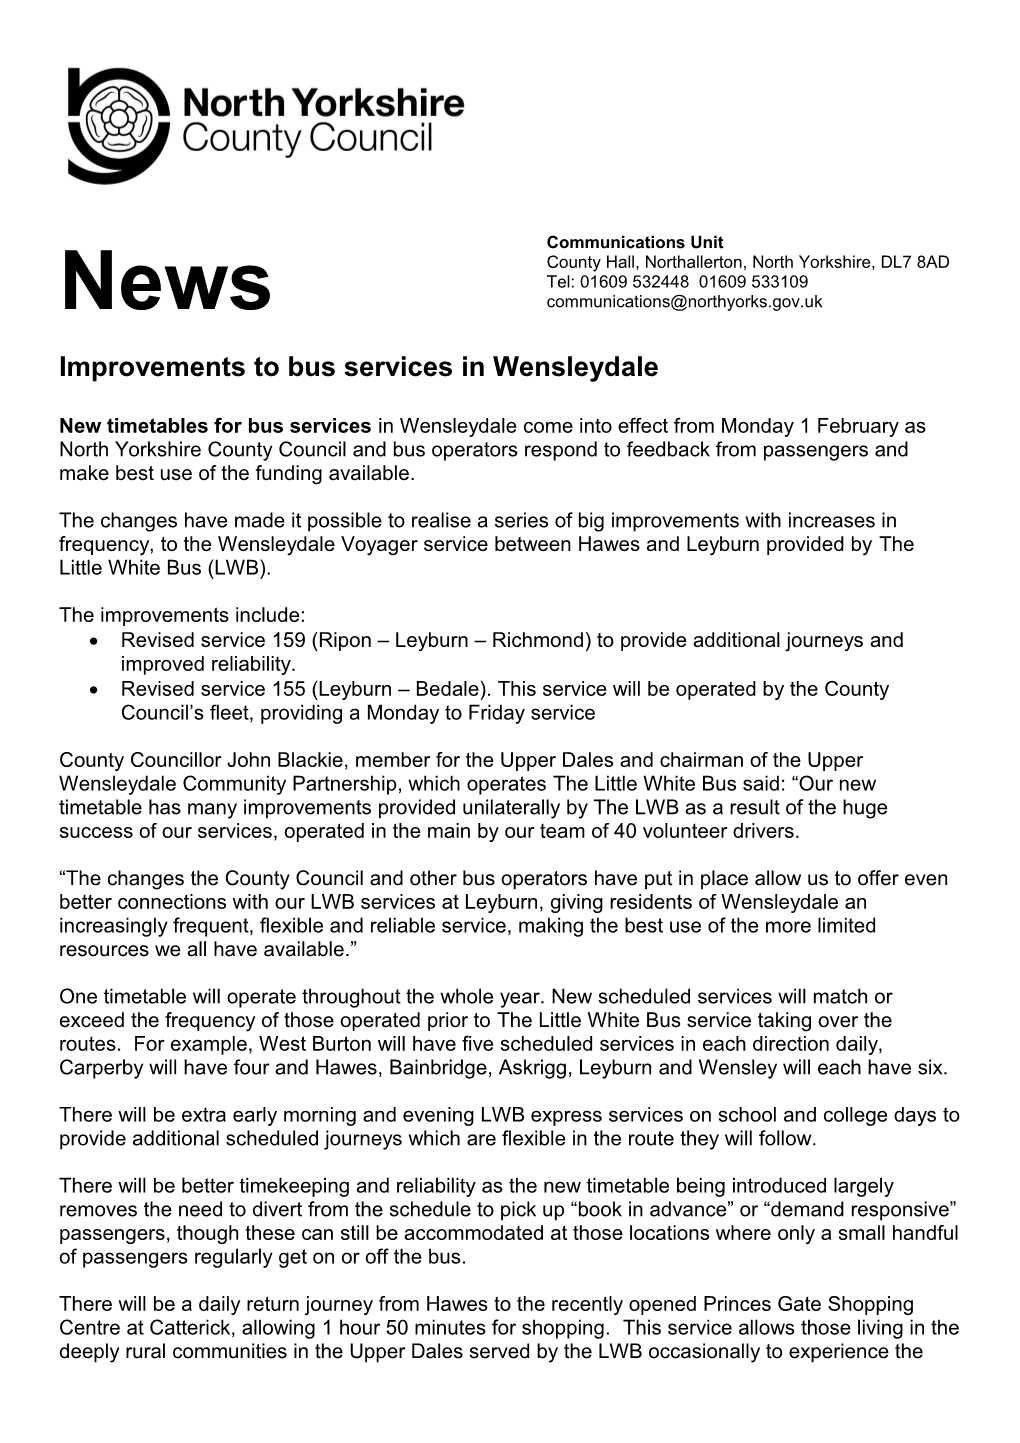 Improvements to Bus Services in Wensleydale